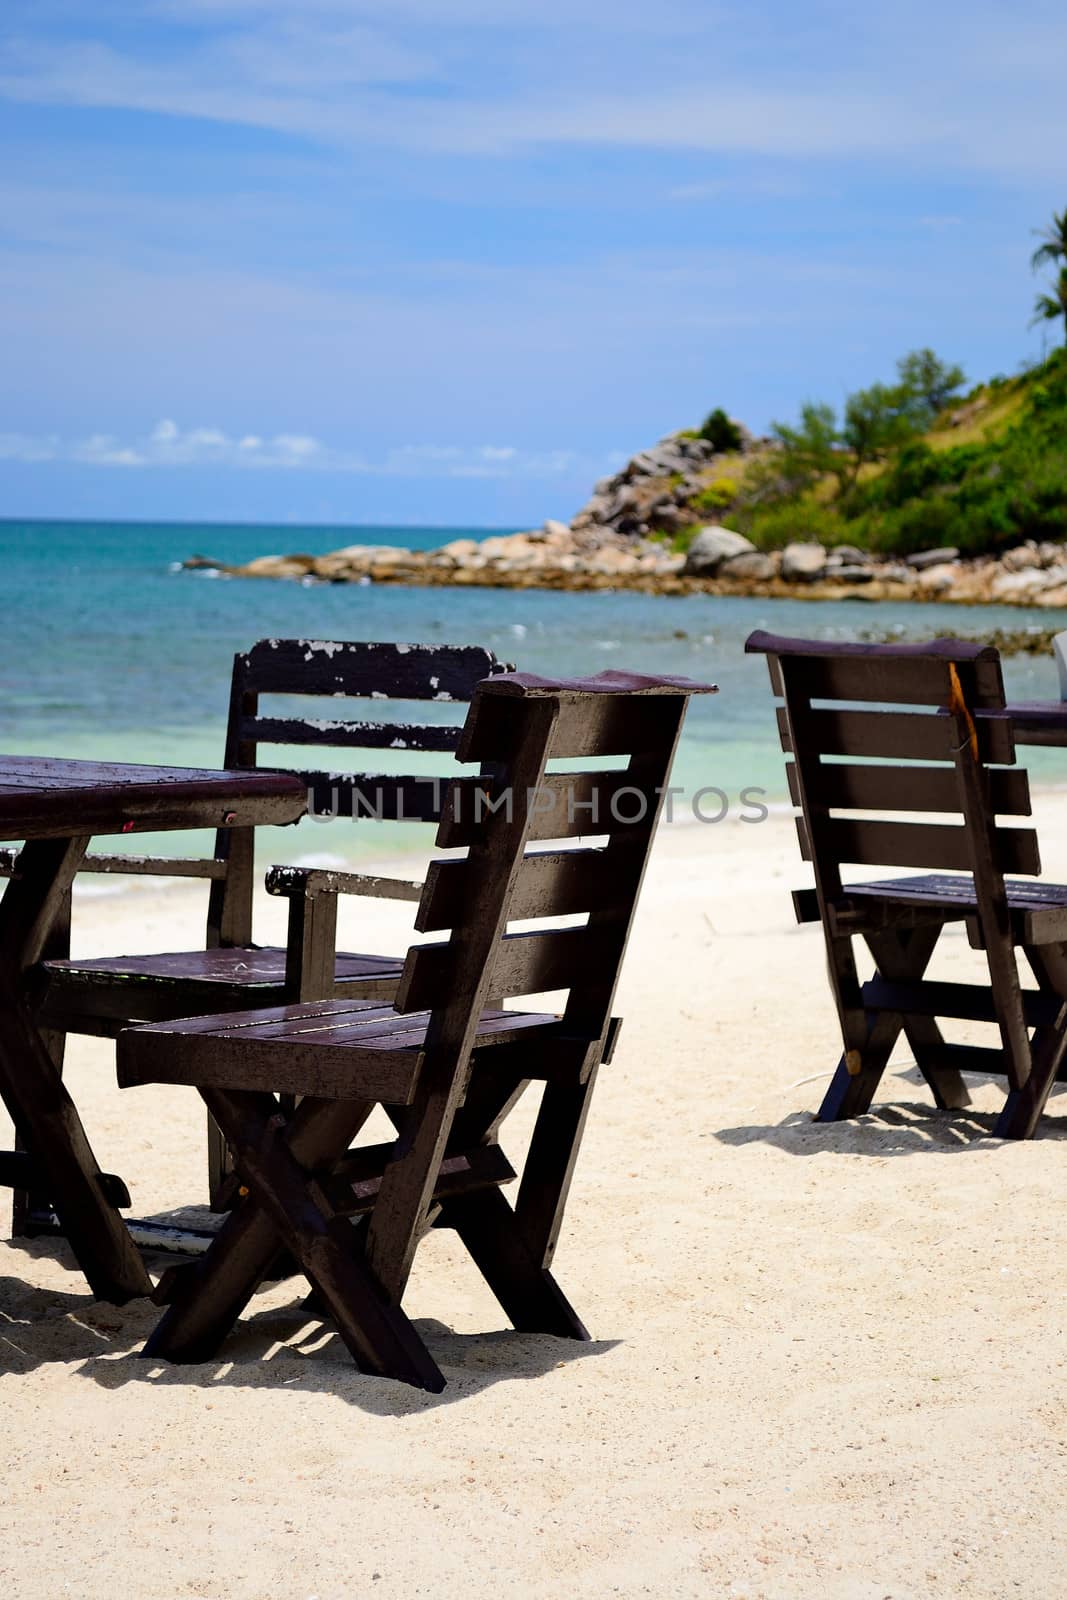 Chairs and table on the coral sandy beach with turquoise transparent water in the background, Koh Phangan, Thailand.